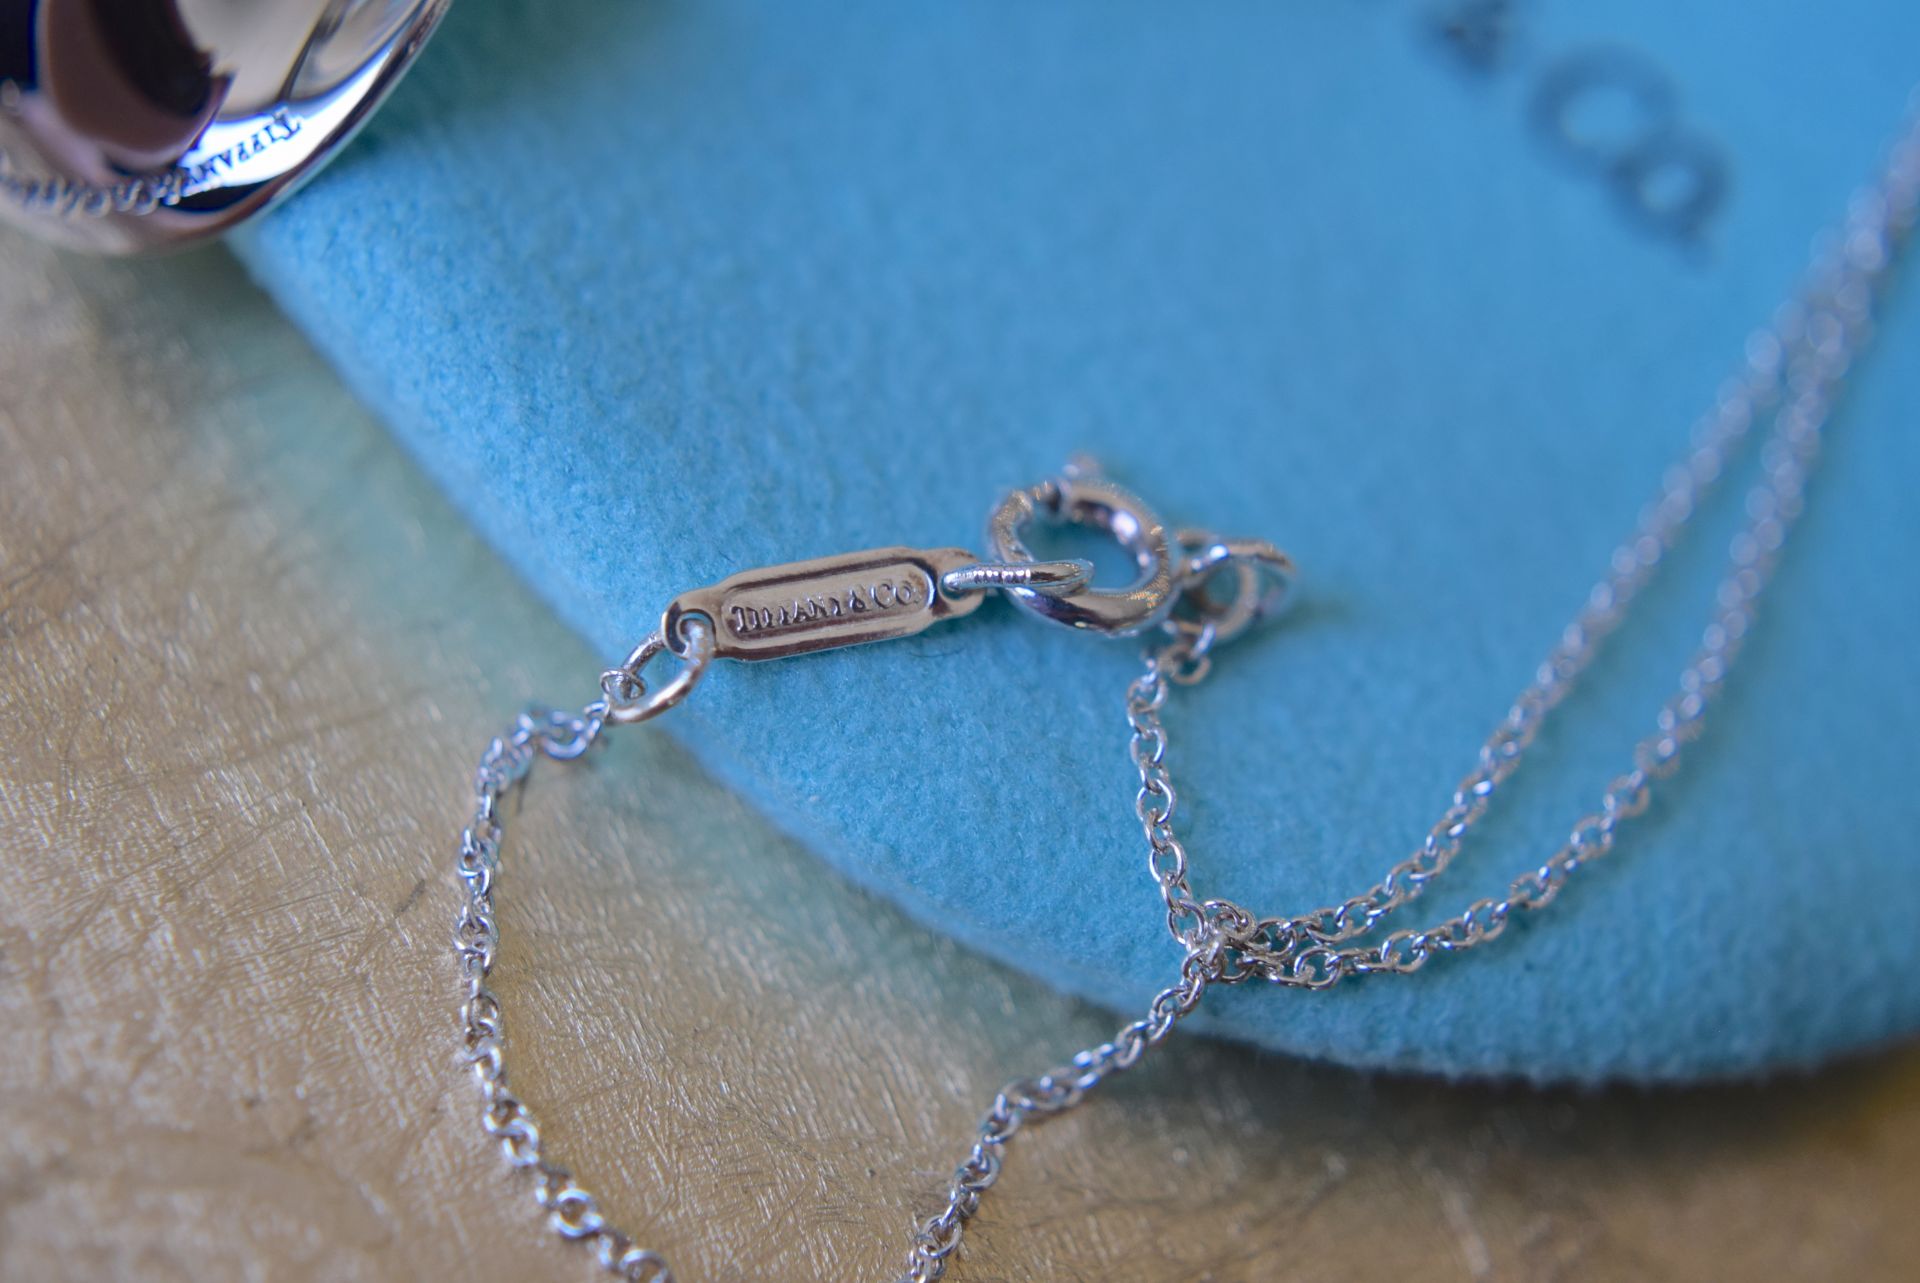 Tiffany & Co. Sterling Silver Frank Gehry ""Orchid Twist Drop"" Necklace - 16"" Chain - Image 2 of 4